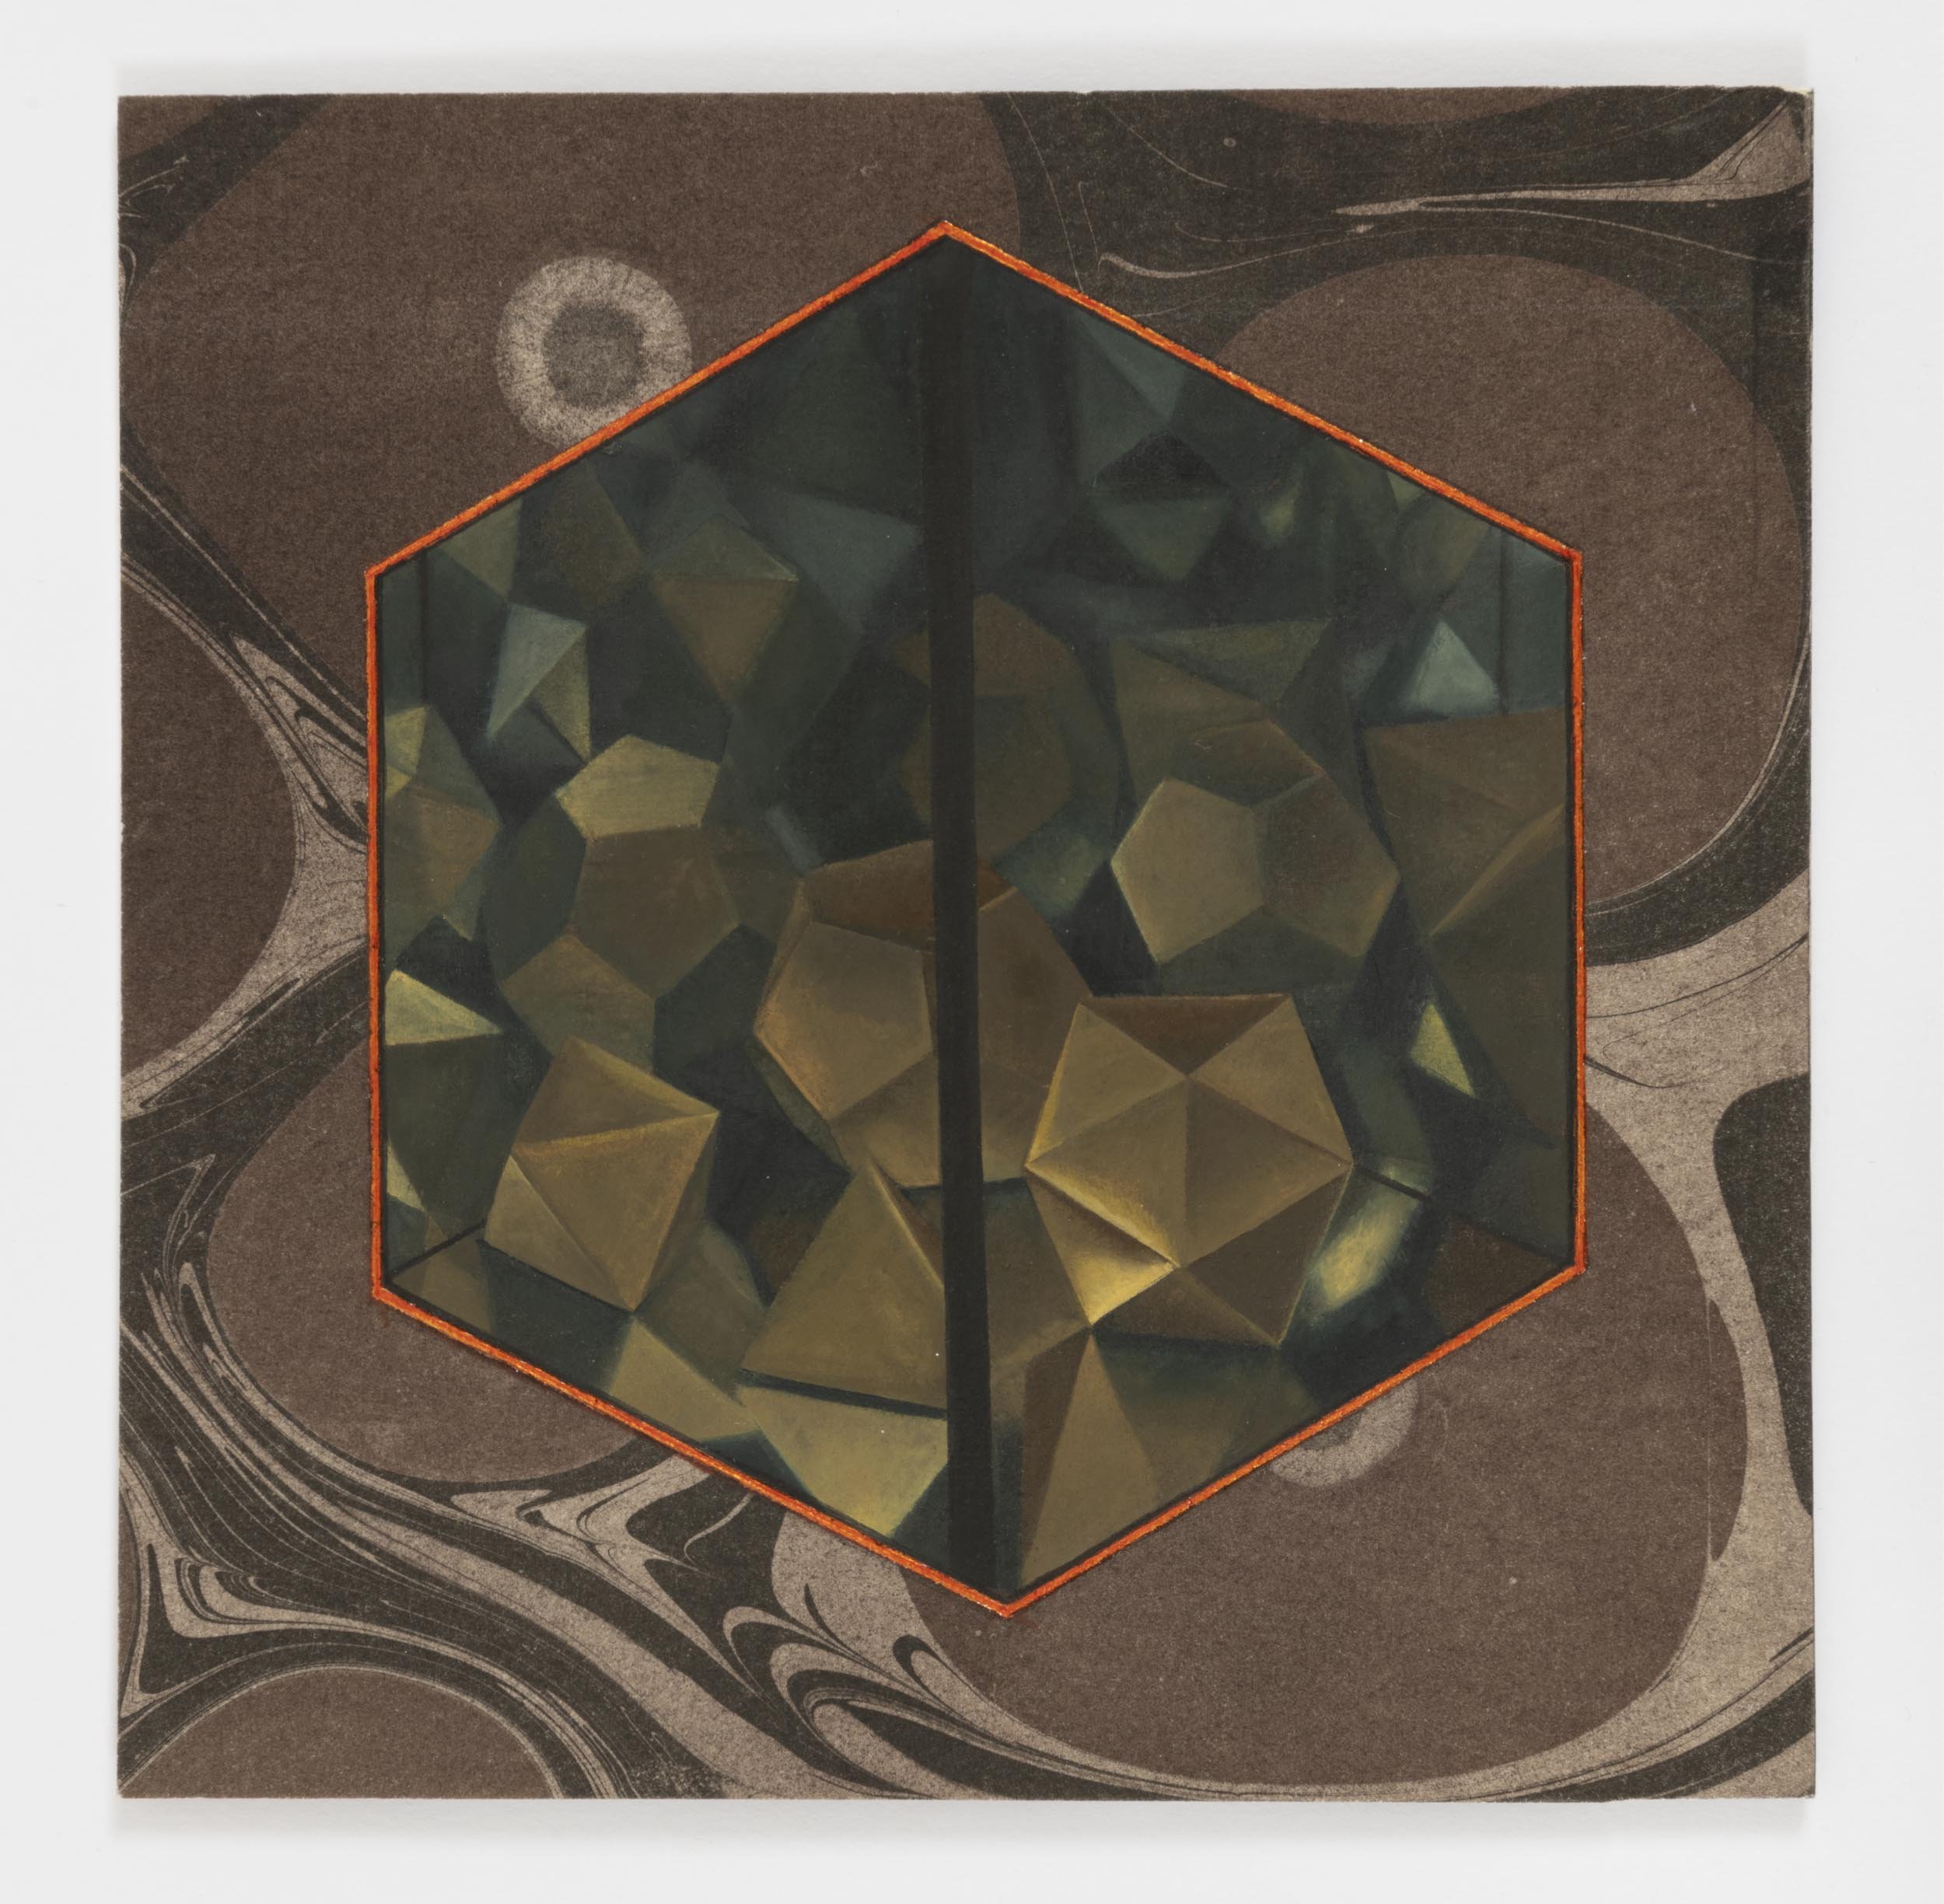  Mirrored Cube 1, 2021 gouache with toned aluminum leaf on paper 7 x 7 in. &nbsp; 18 x 18 cm. 